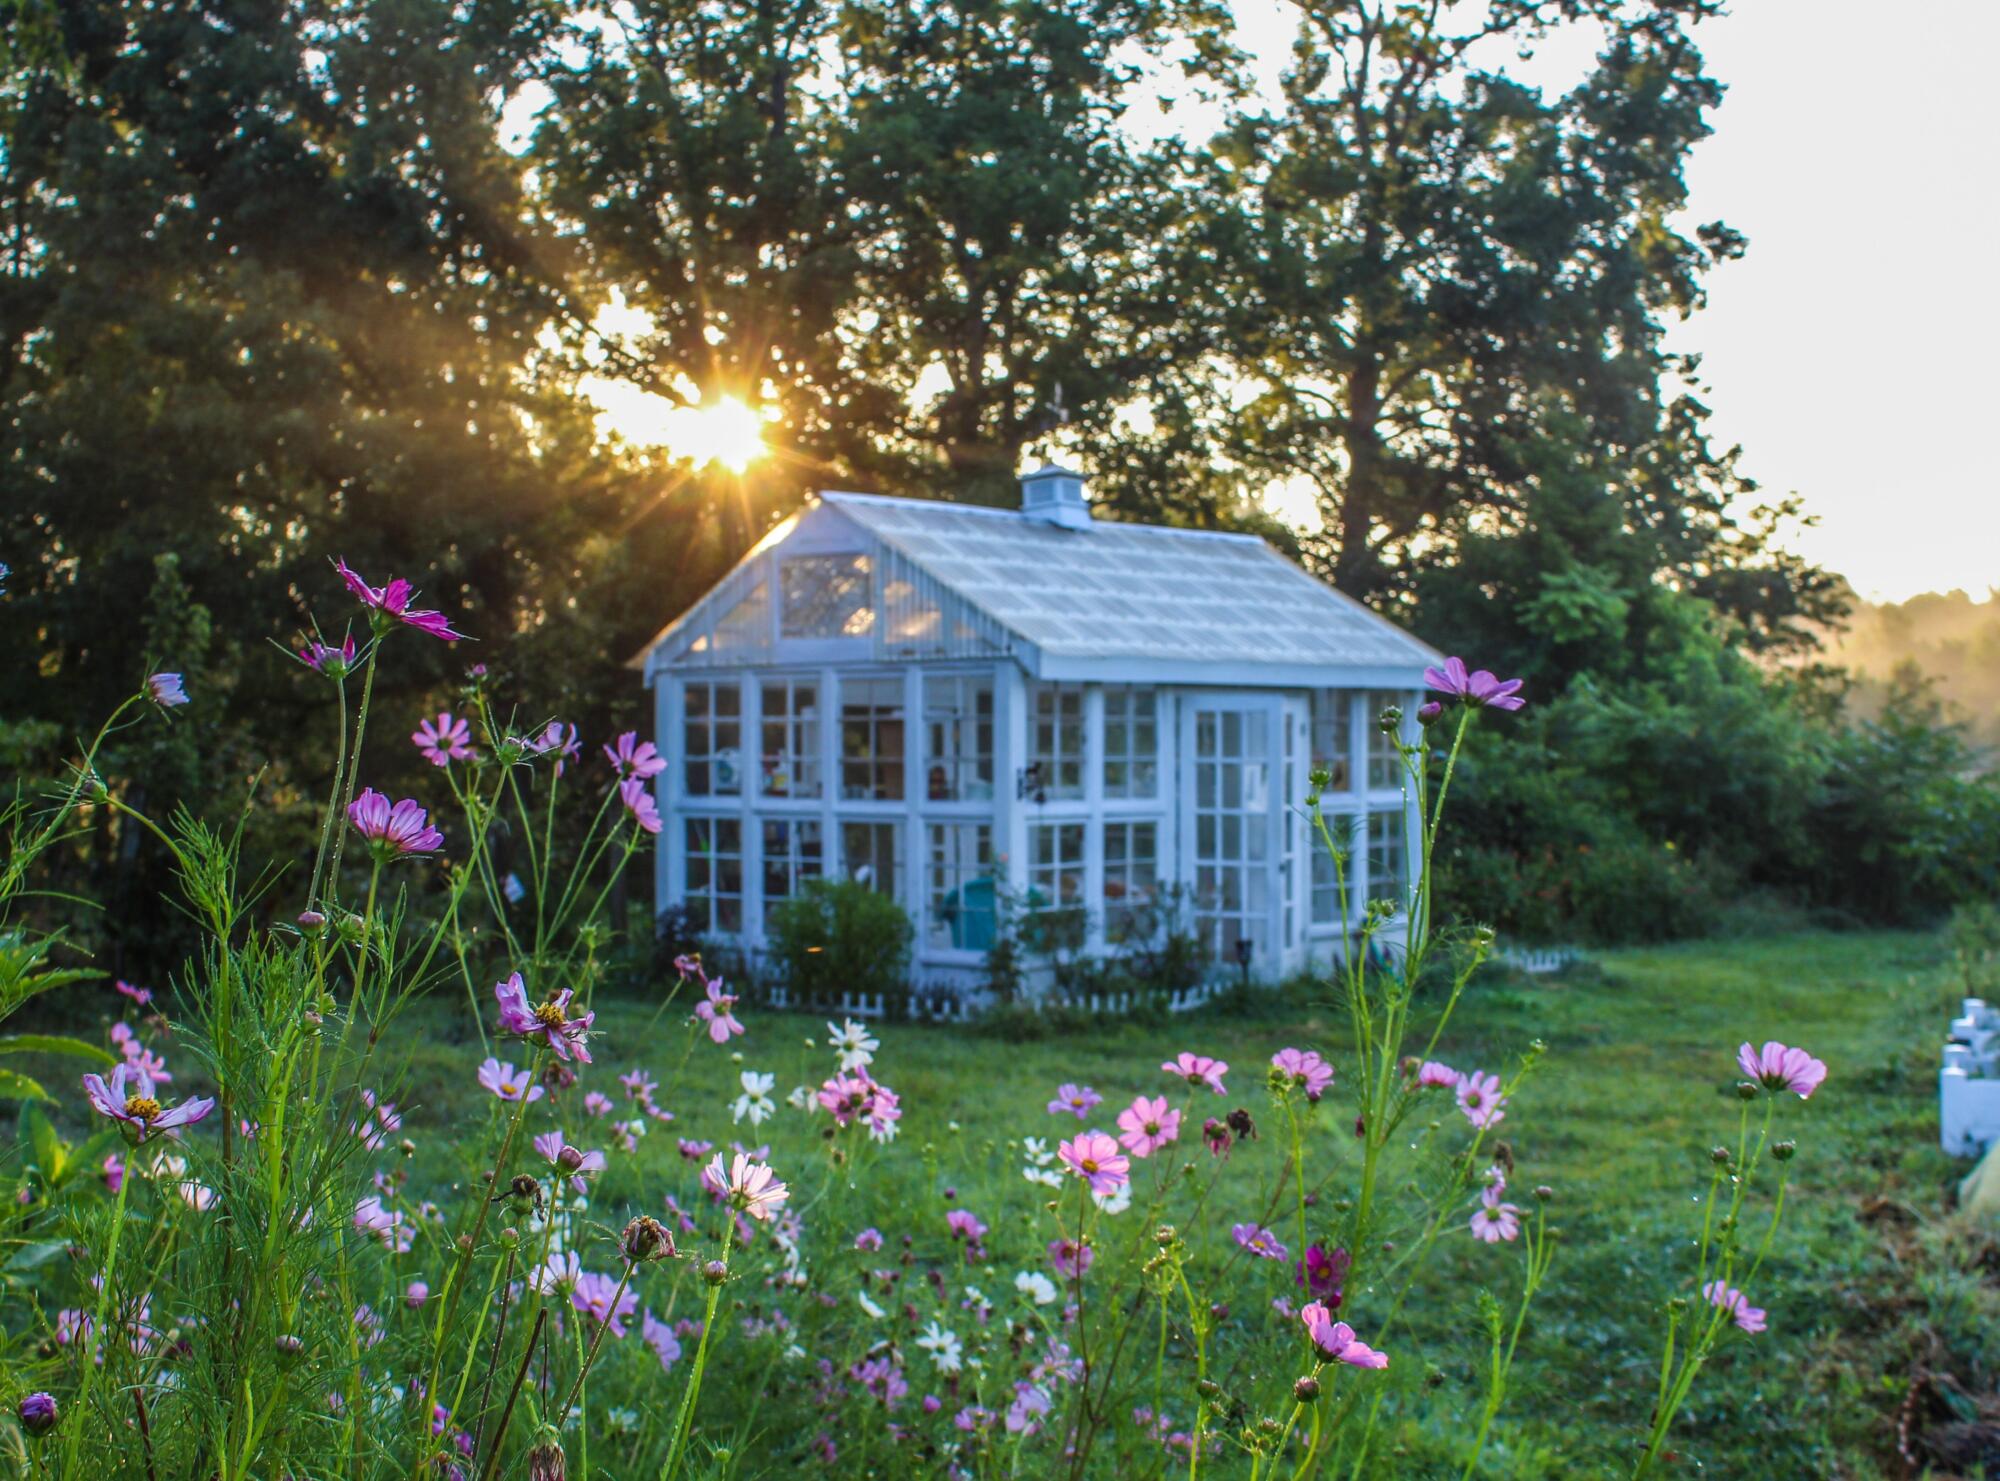 A garden shed with flowers, benefits of having a wooden greenhouse in your garden.